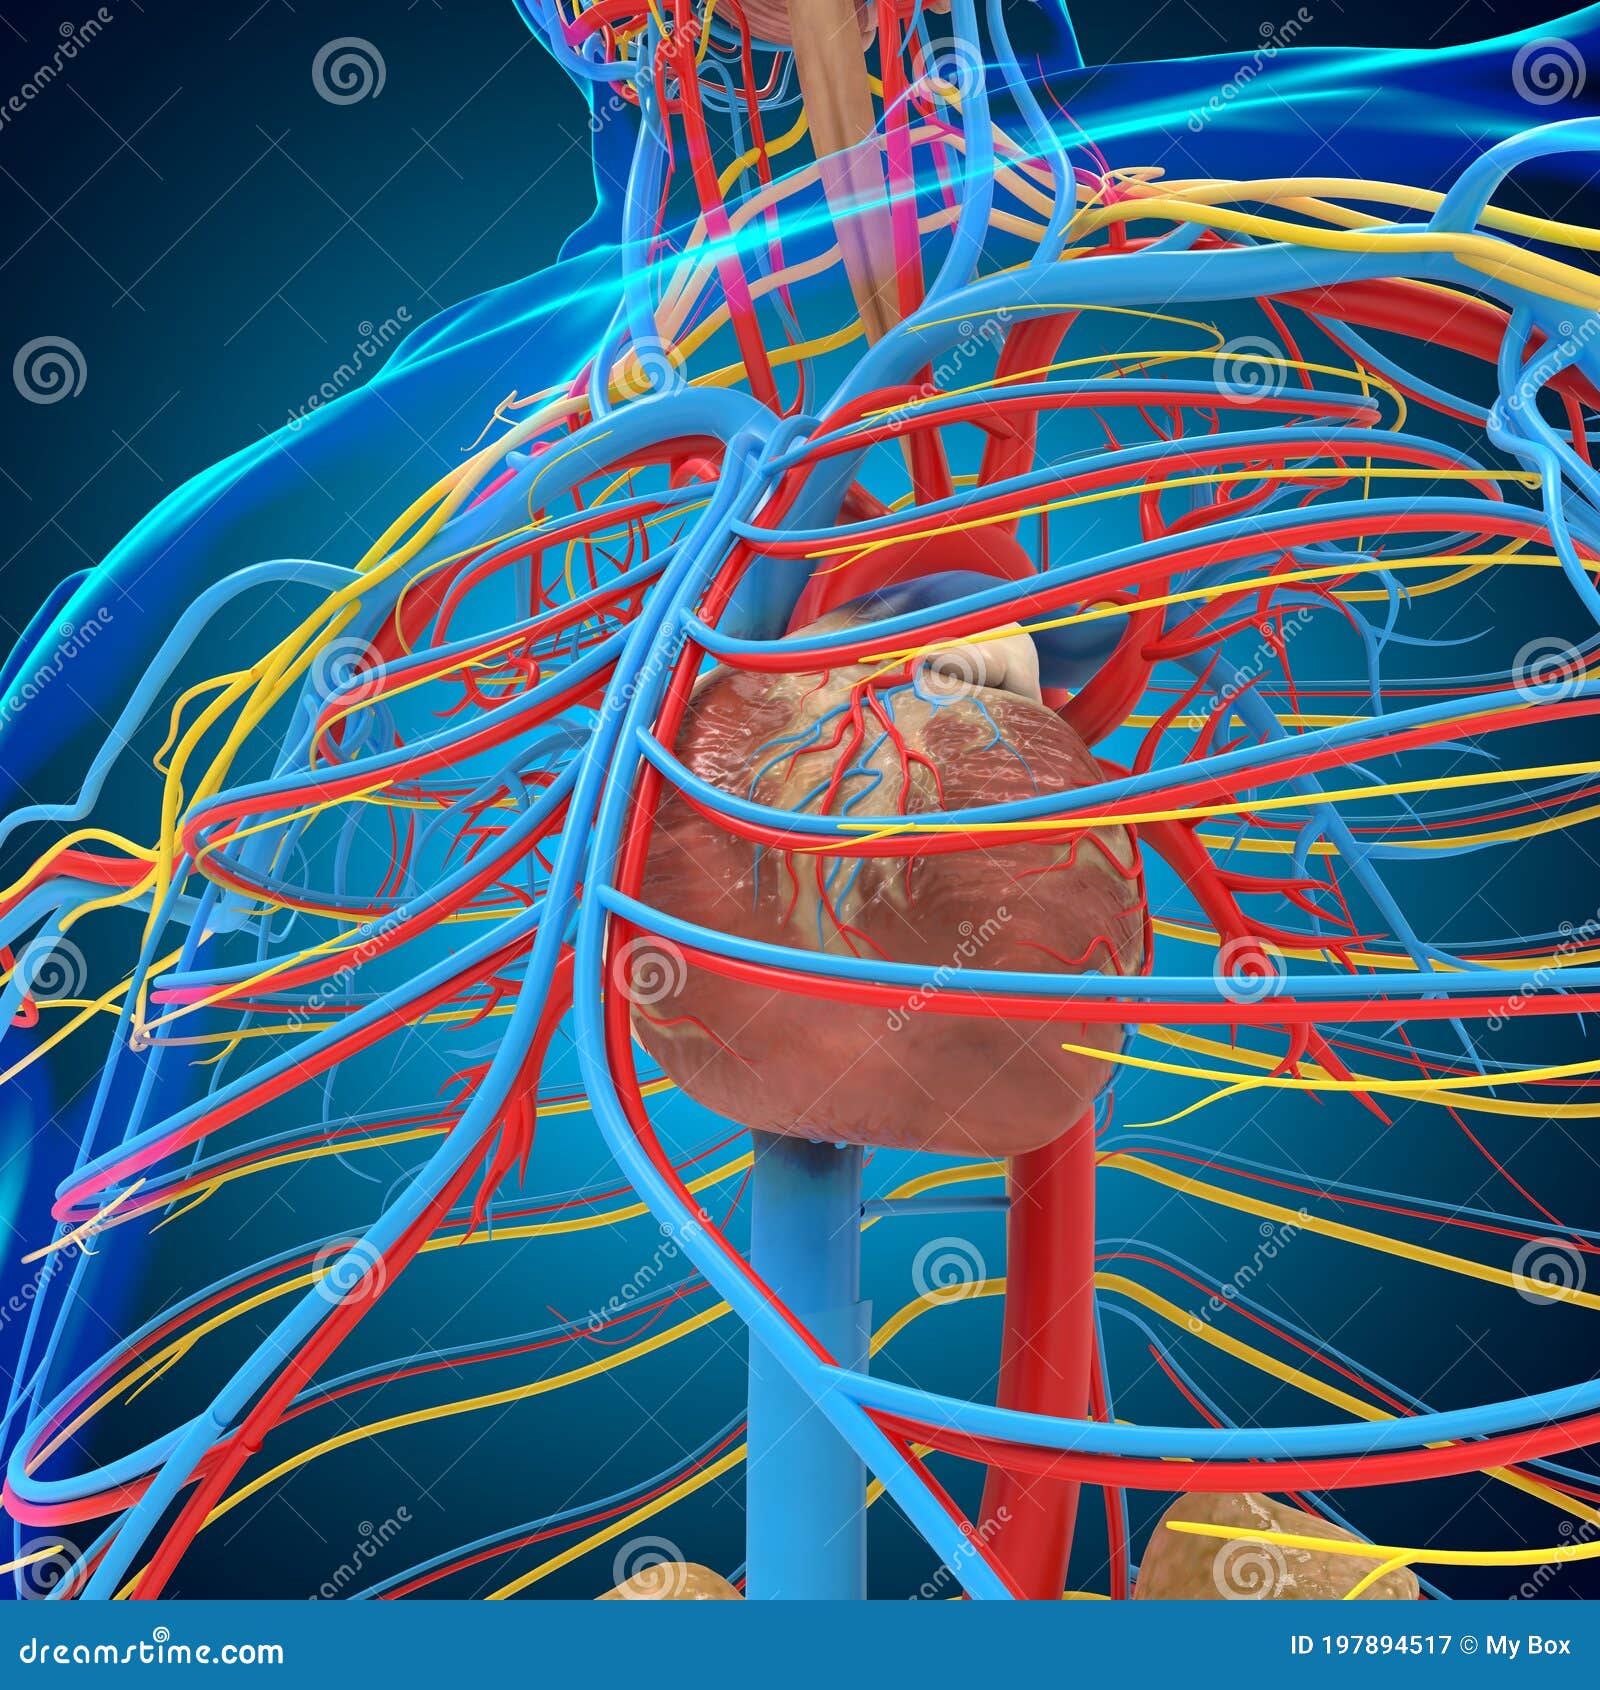 Human Circulatory System Anatomy with Heart for Medical Concept 3D ...